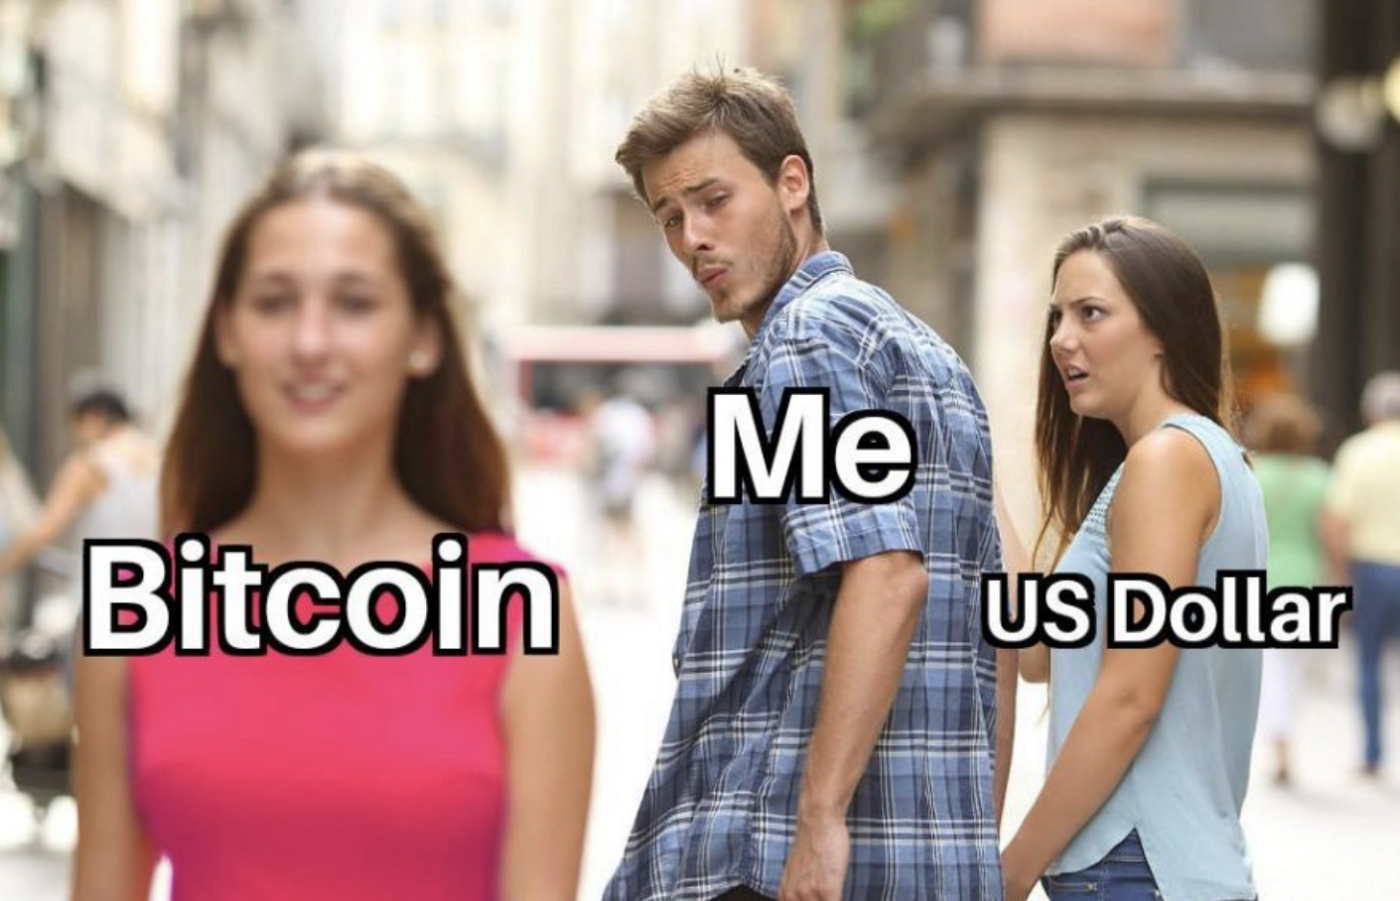 40 Funniest Bitcoin Memes To Share With Your Friends - Finance Illustrated